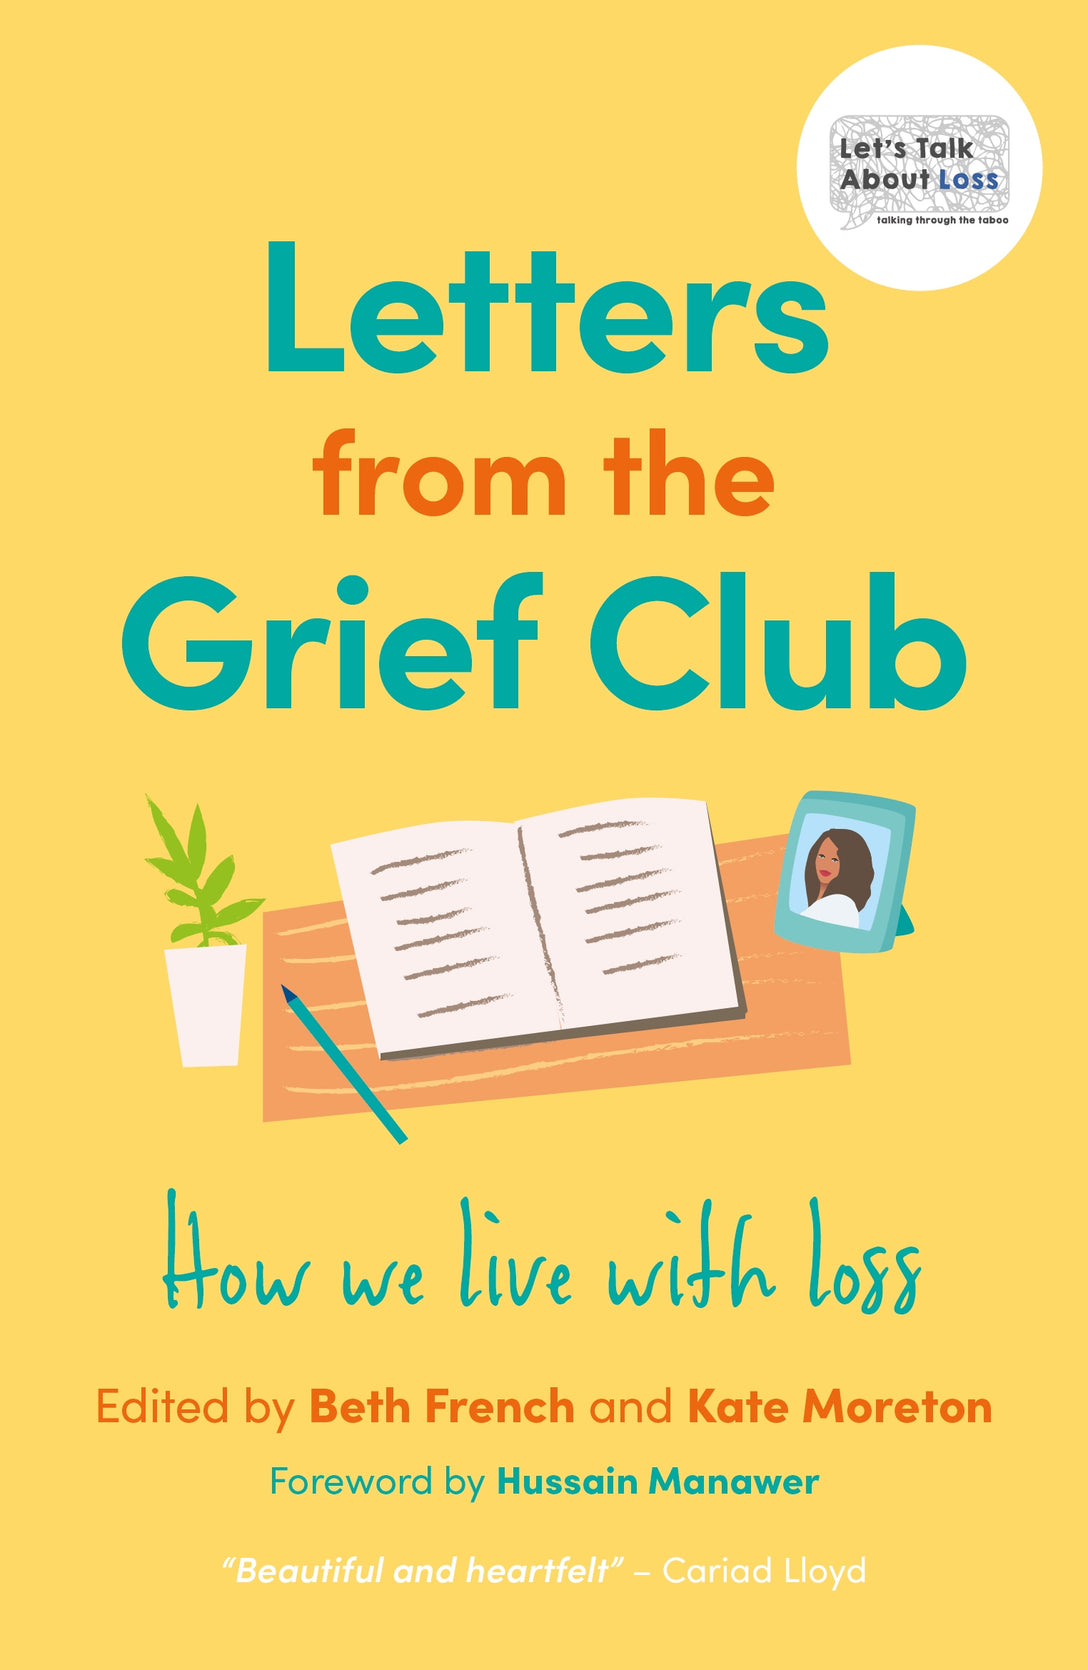 Letters from the Grief Club by Beth French, No Author Listed, Kate Moreton, Hussain Manawer